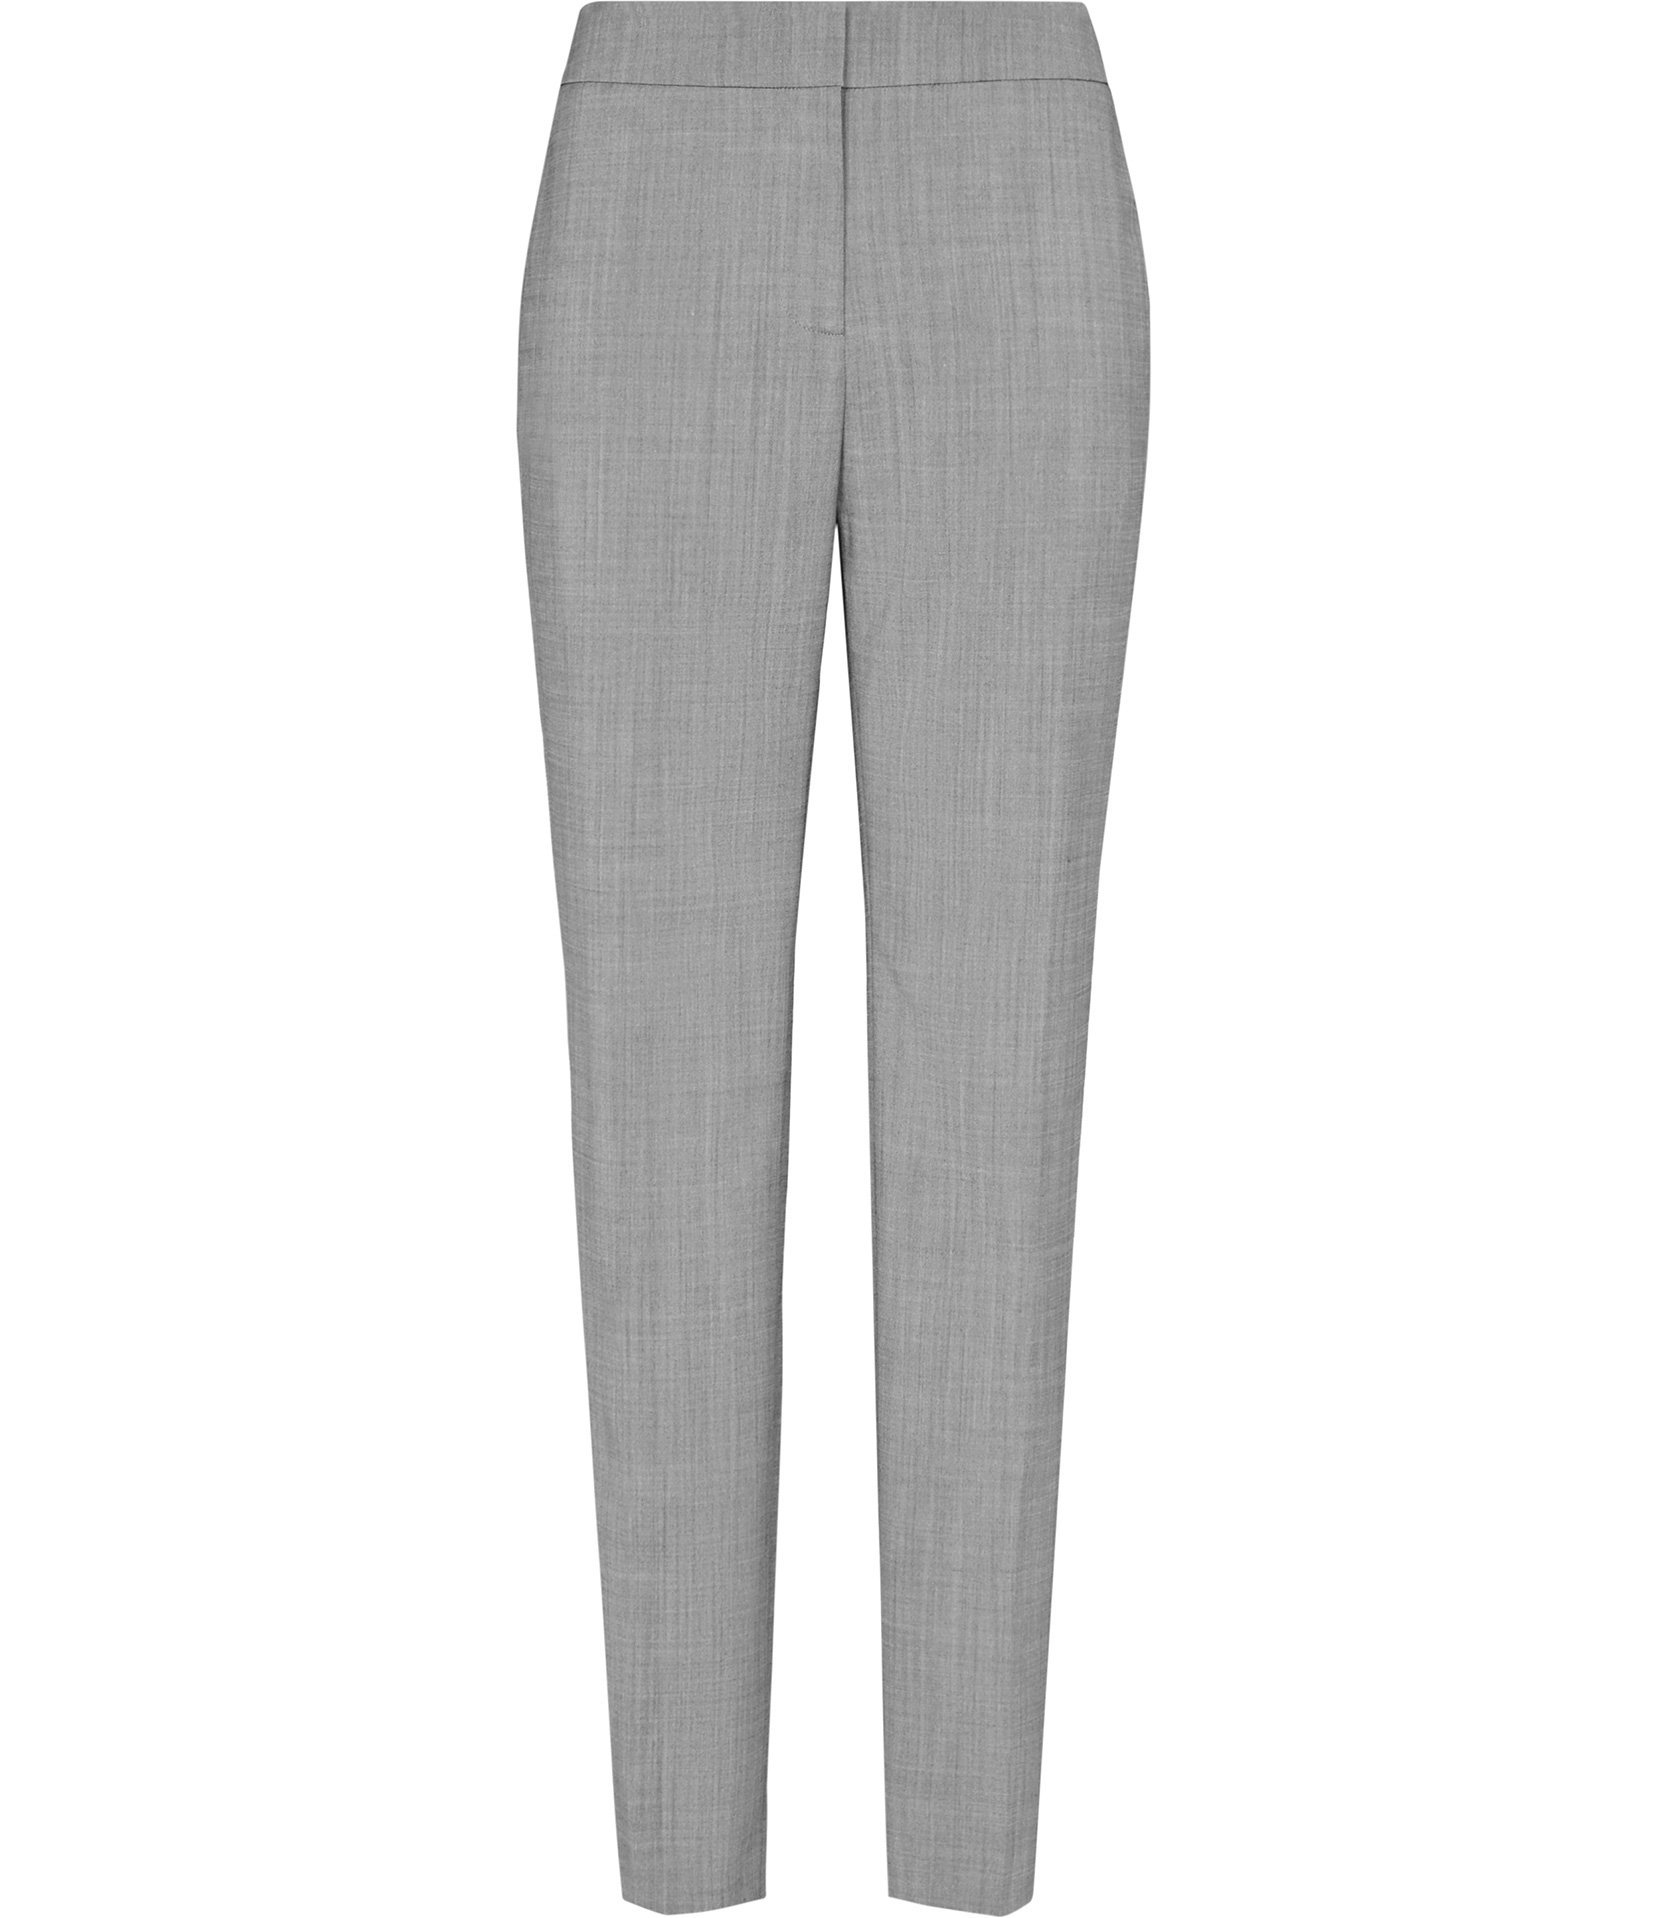 reiss-mid-grey-claris-row-straight-leg-tailored-trousers-product-1-12431007-612150944.jpeg